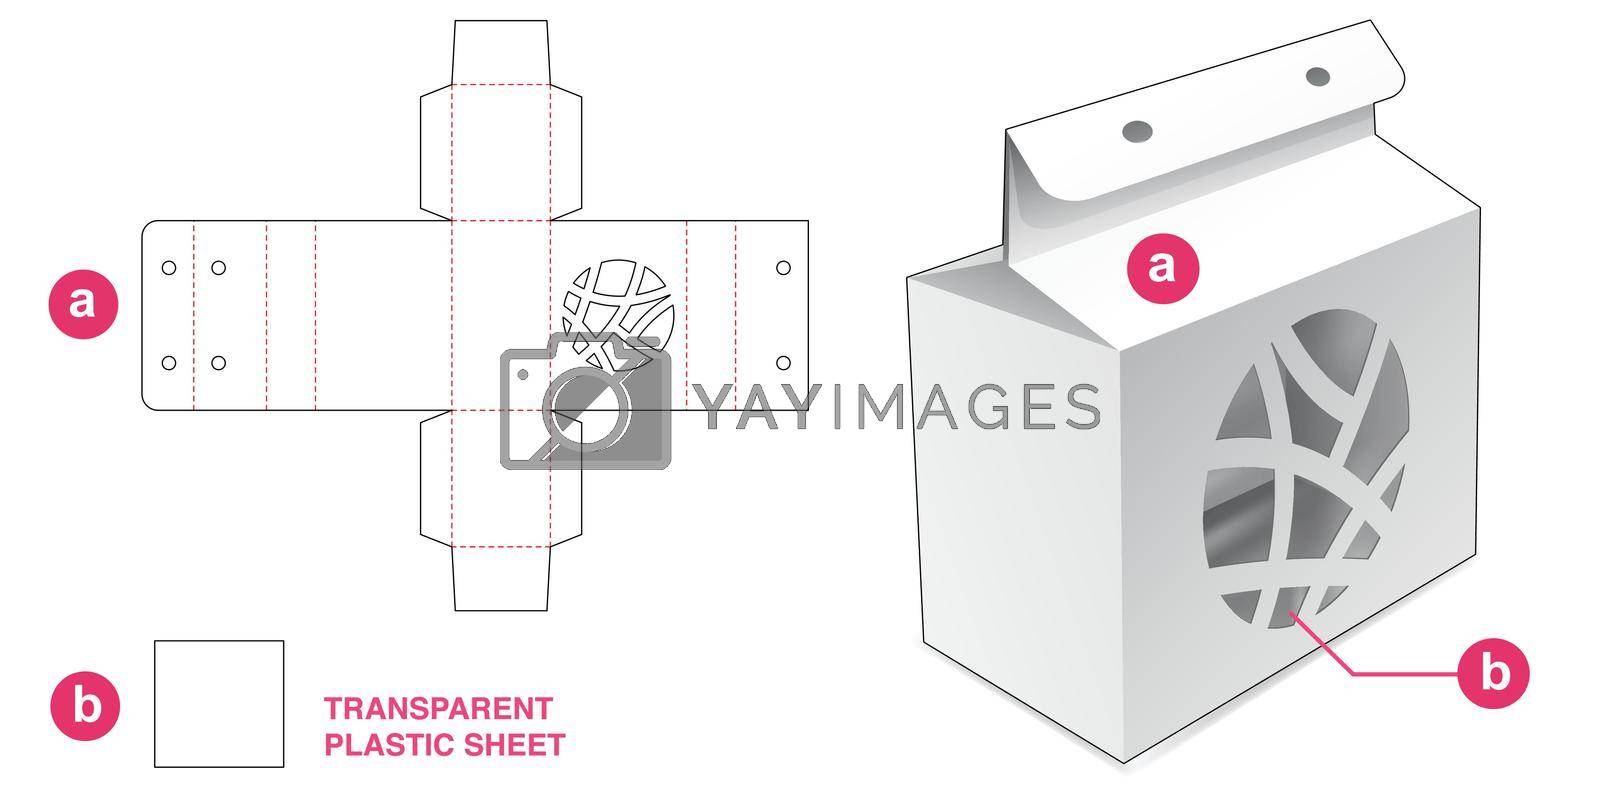 Royalty free image of Box with abstract circle window and plastic sheet die cut template by valueinvestor